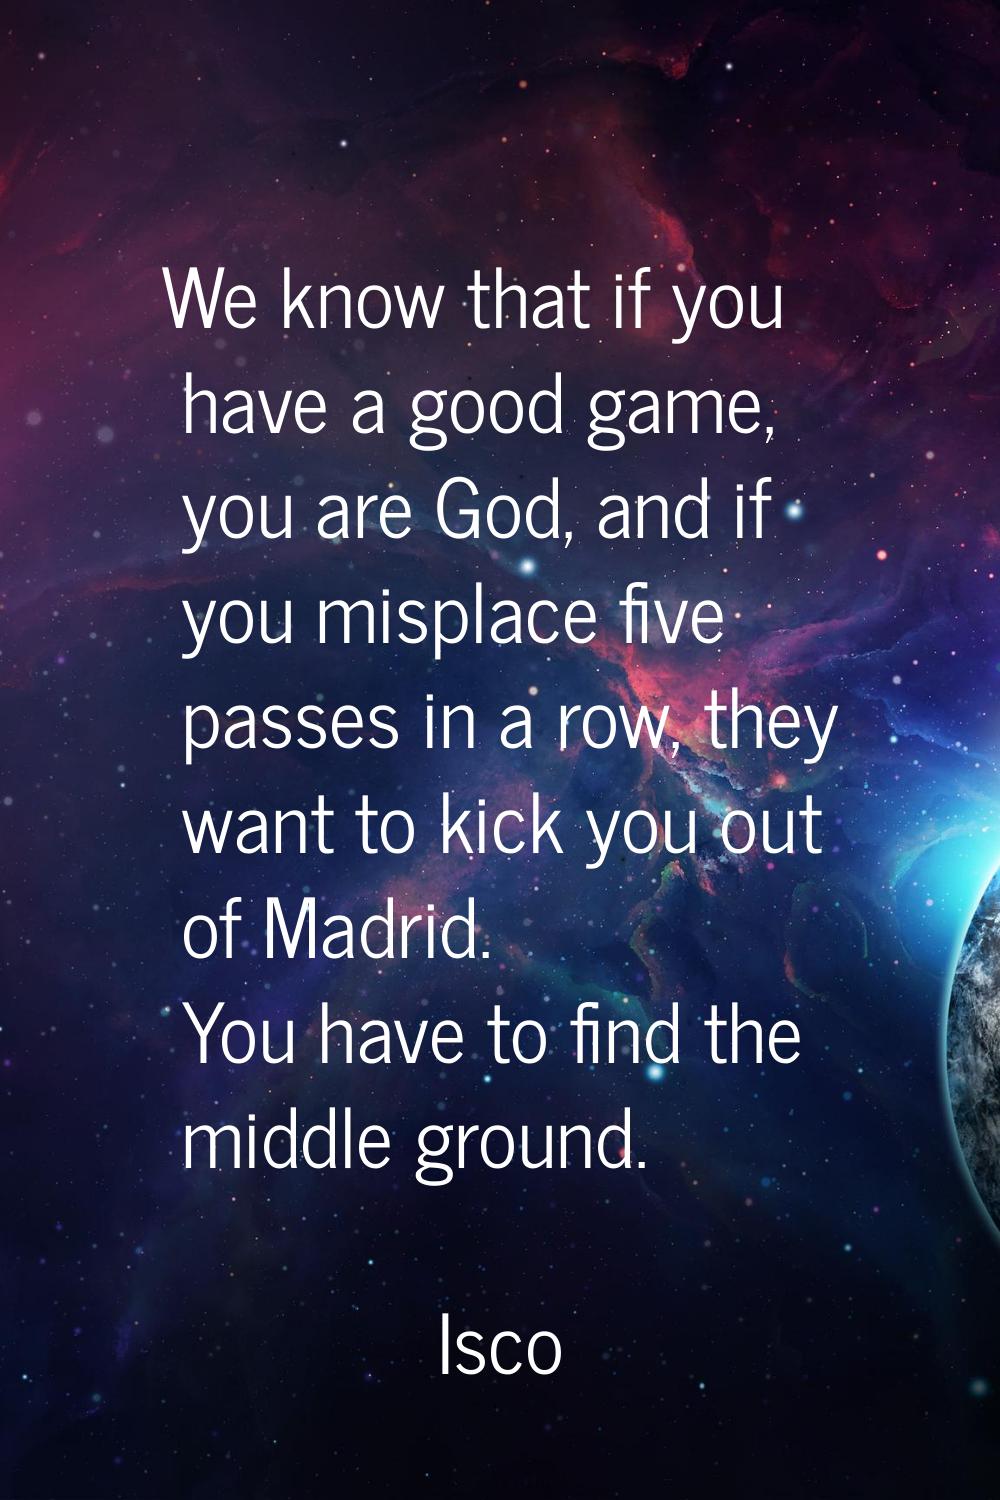 We know that if you have a good game, you are God, and if you misplace five passes in a row, they w